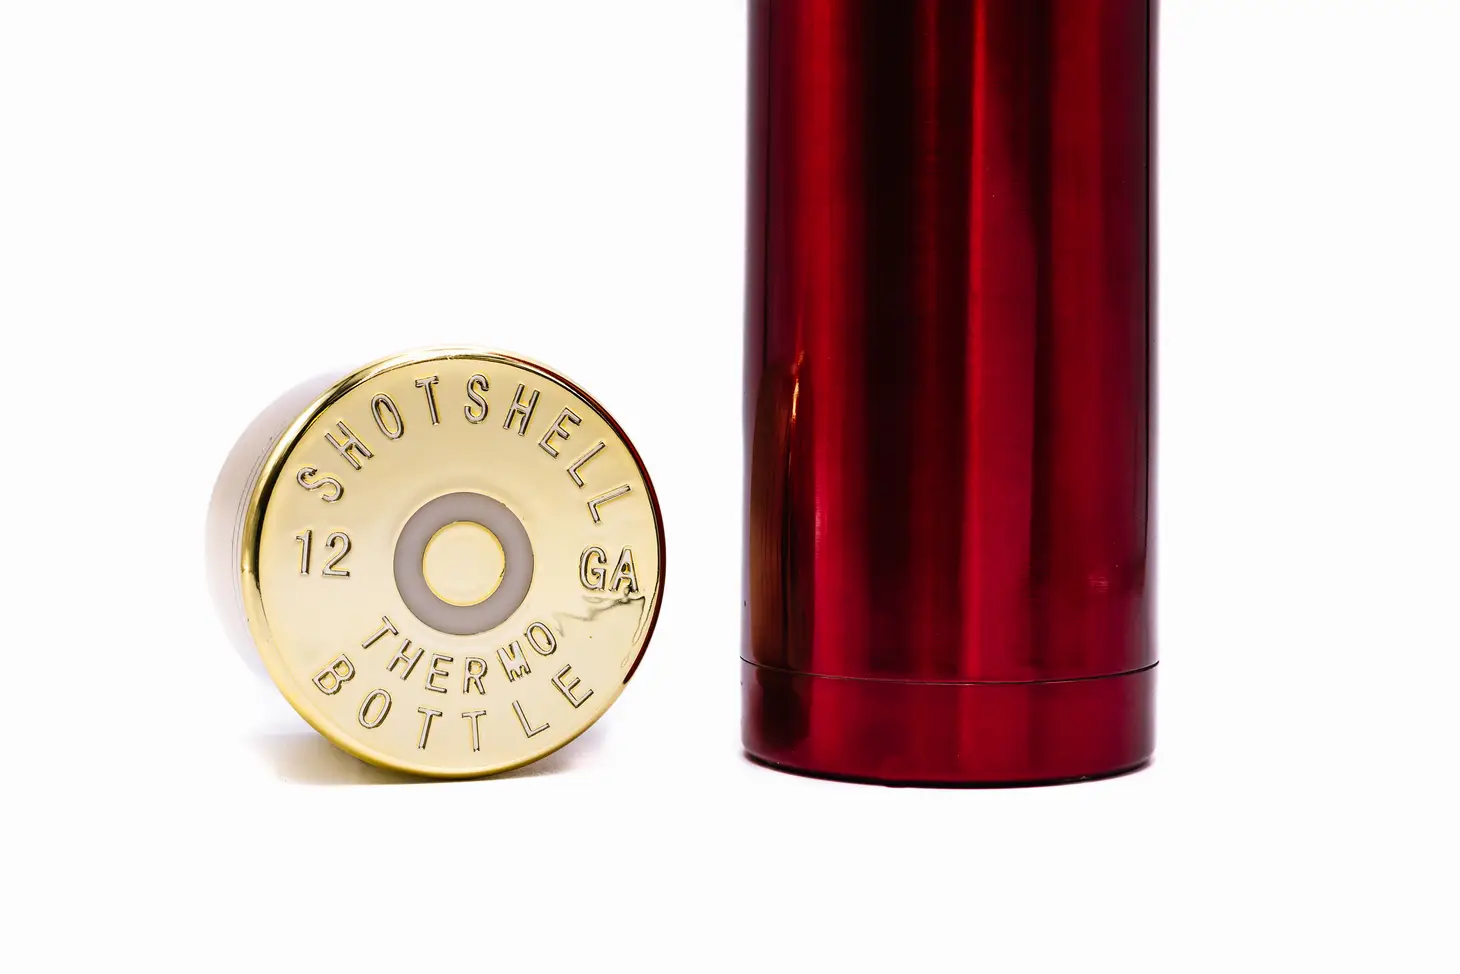 Shotgun Shell Red Thermo Bottle 1 Liter 13″ Tall Insulated – Fraser Wood  Elements